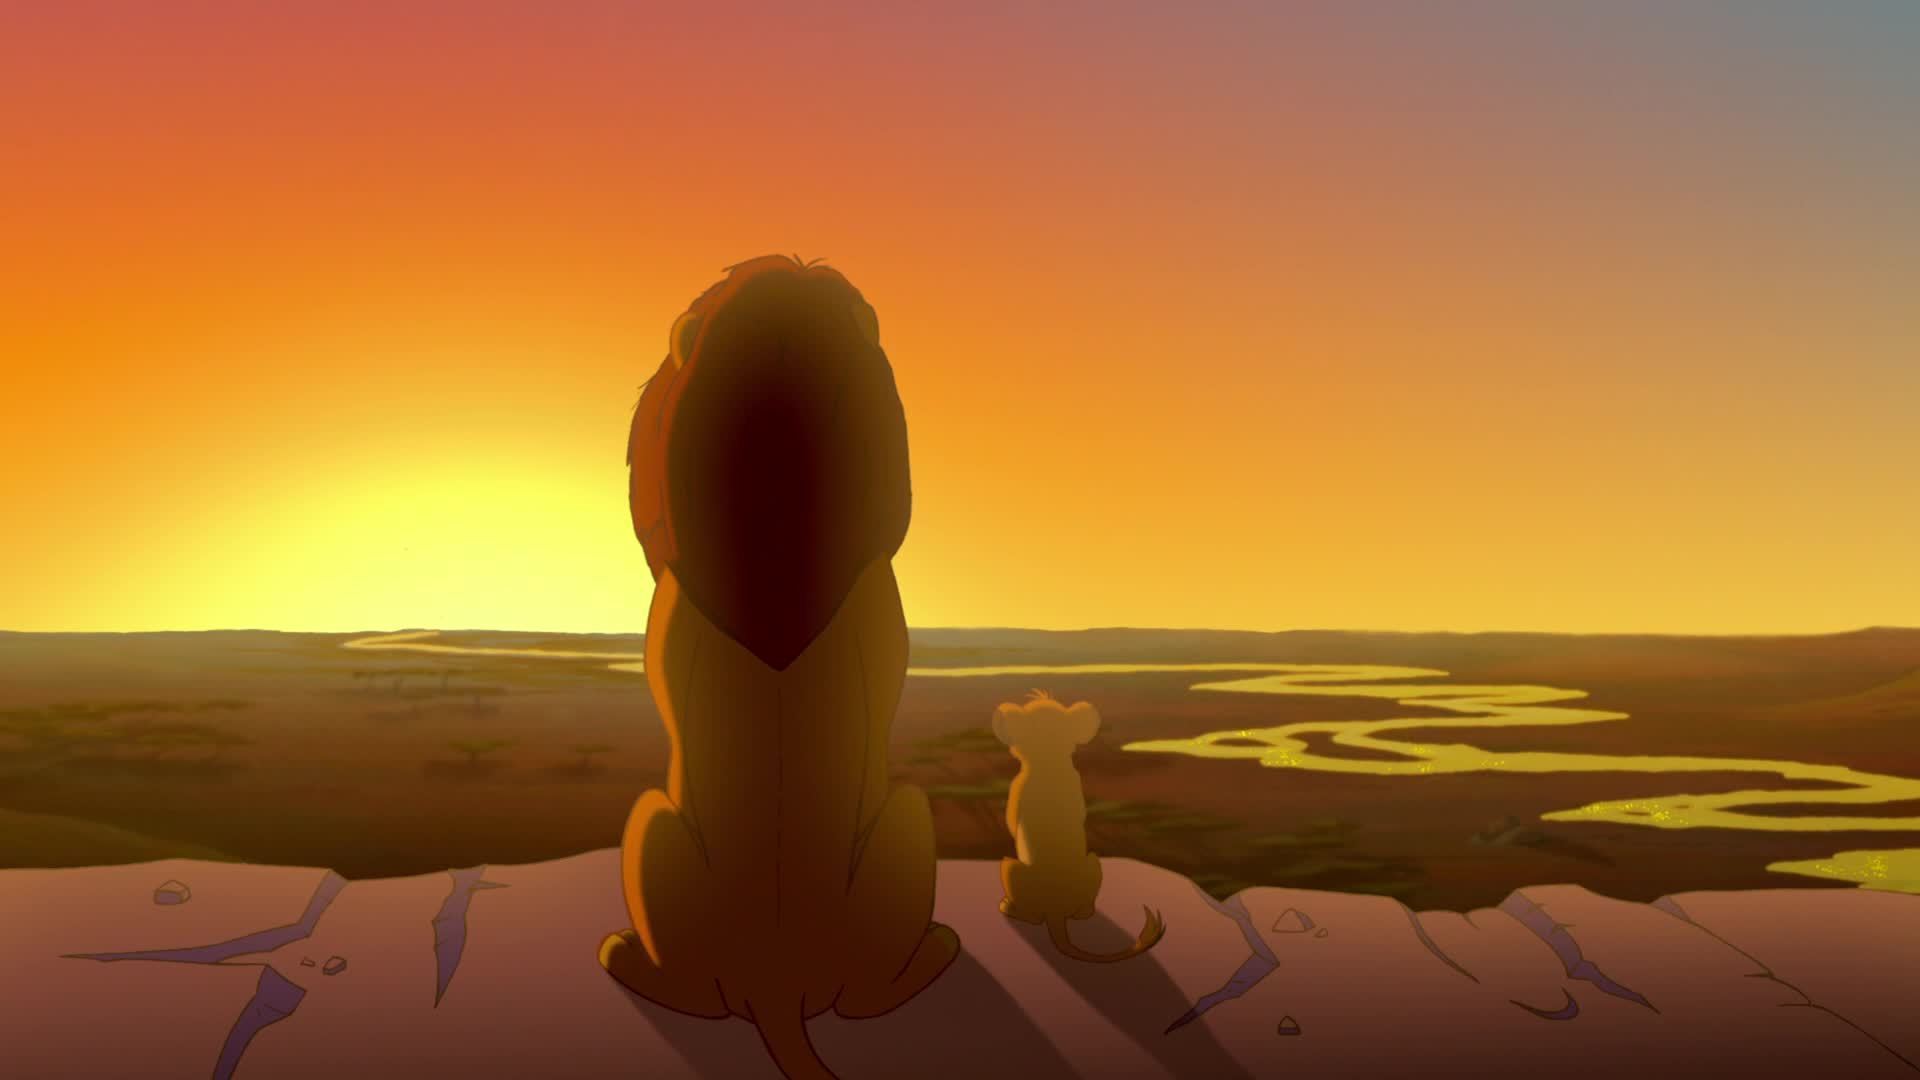 The Lion King | Trailer